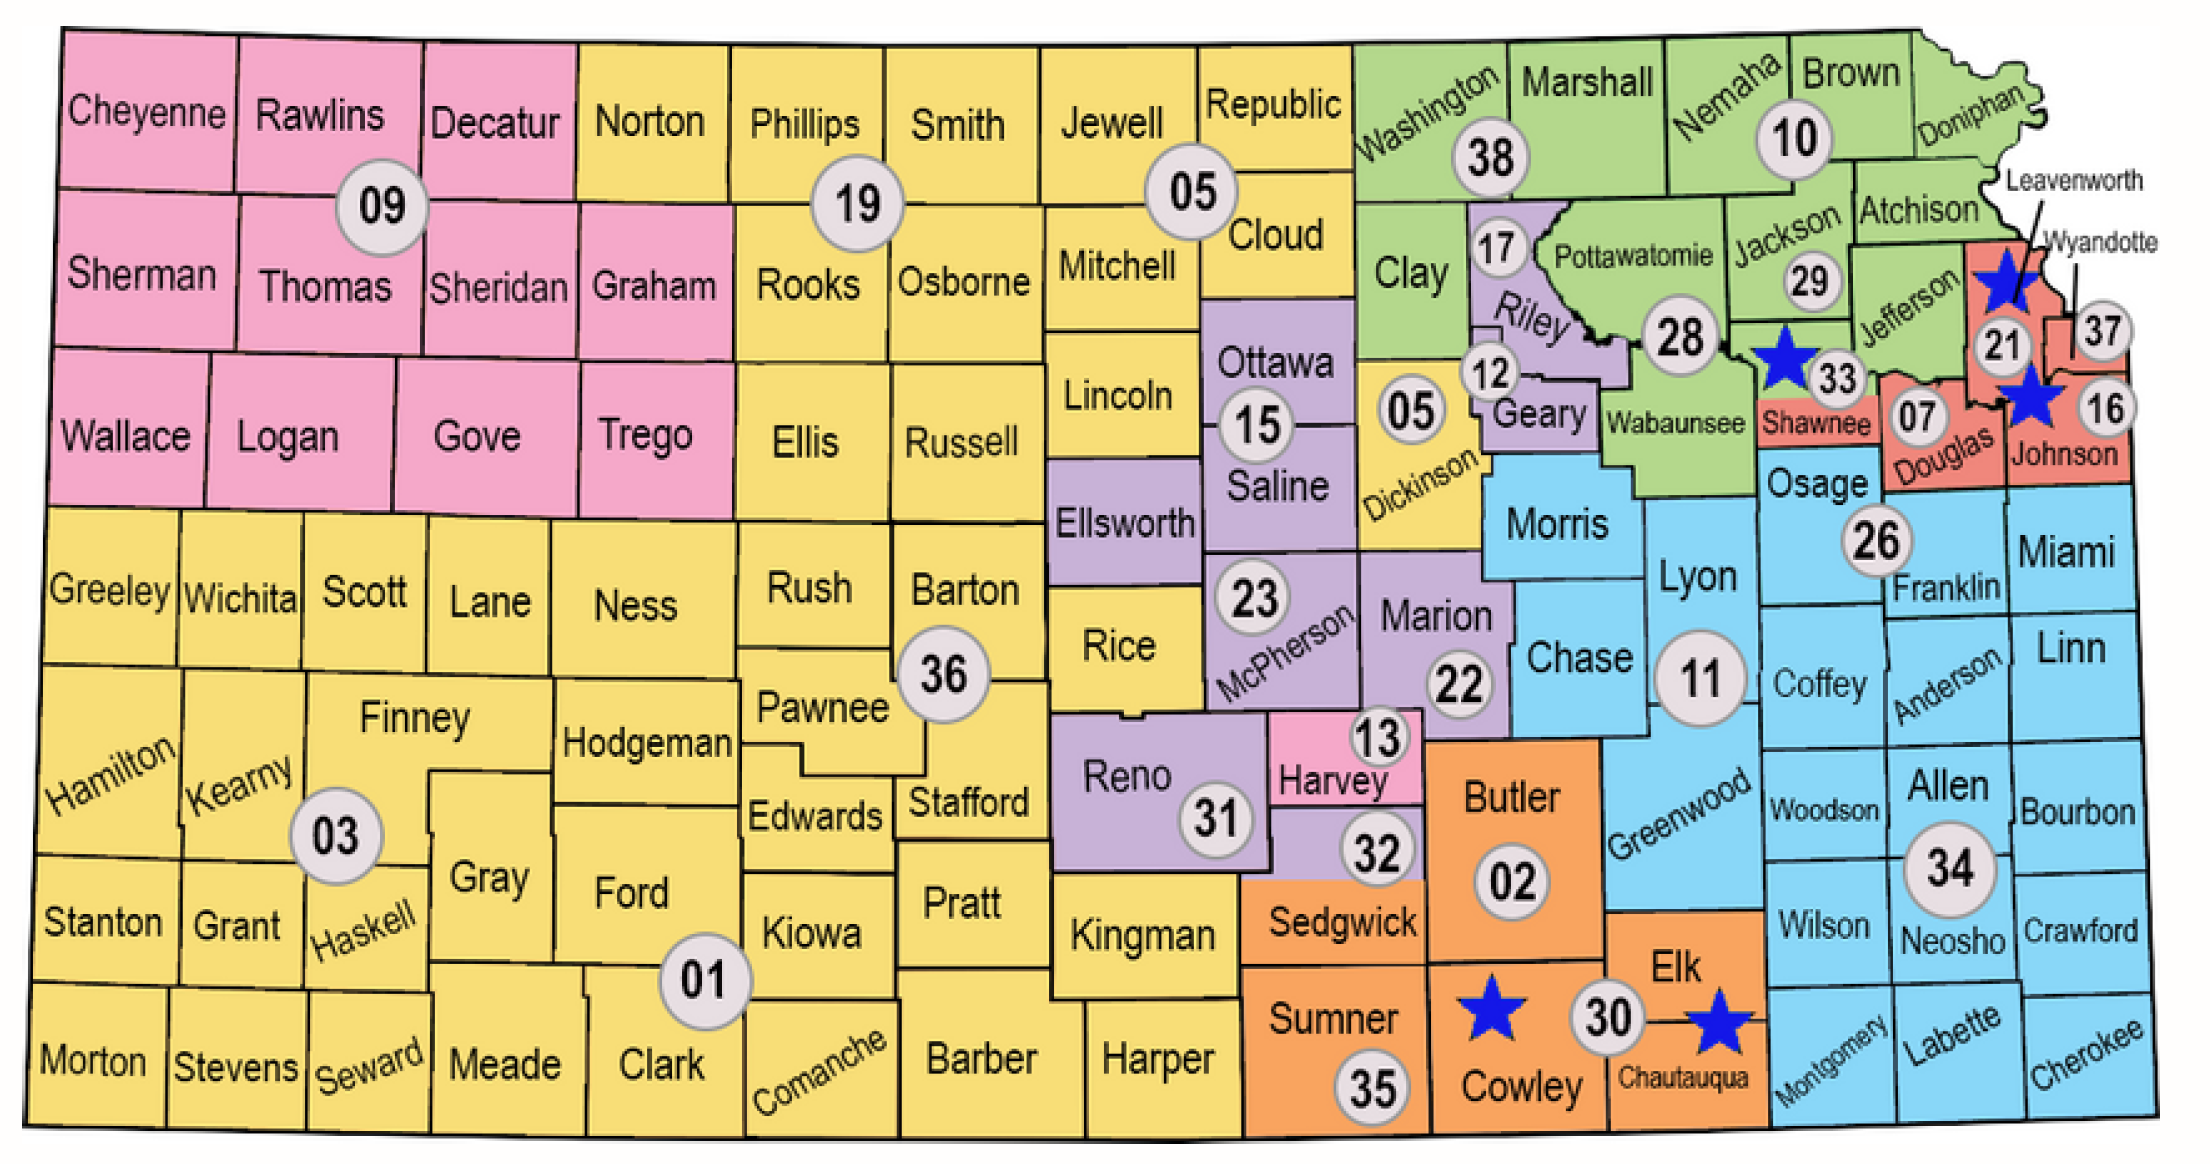 The Family Infant-Toddler Services map shows the state of Kansas divided into seven regional sections. Each region is assigned a color. The 11 pink counties in northwest and Harvey County Kansas are served by the FIT team, 43 yellow counties in central and western Kansas are served by Melissa Schlegel, 9 purple counties in central and north central Kansas are served by Teri Chaney, 5 orange counties in south central Kansas are served by Rachel Ghram, 15 green counties in northeast Kansas are served by Heather Pedersen, 3 red counties (Johnson, Wyandotte, and Douglas) are served by Laura Wohlhuter, 19 blue counties in southeast Kansas are served by Tammy Warford, and 5 blue stared counties in eastern Kansas are served by De McDougald